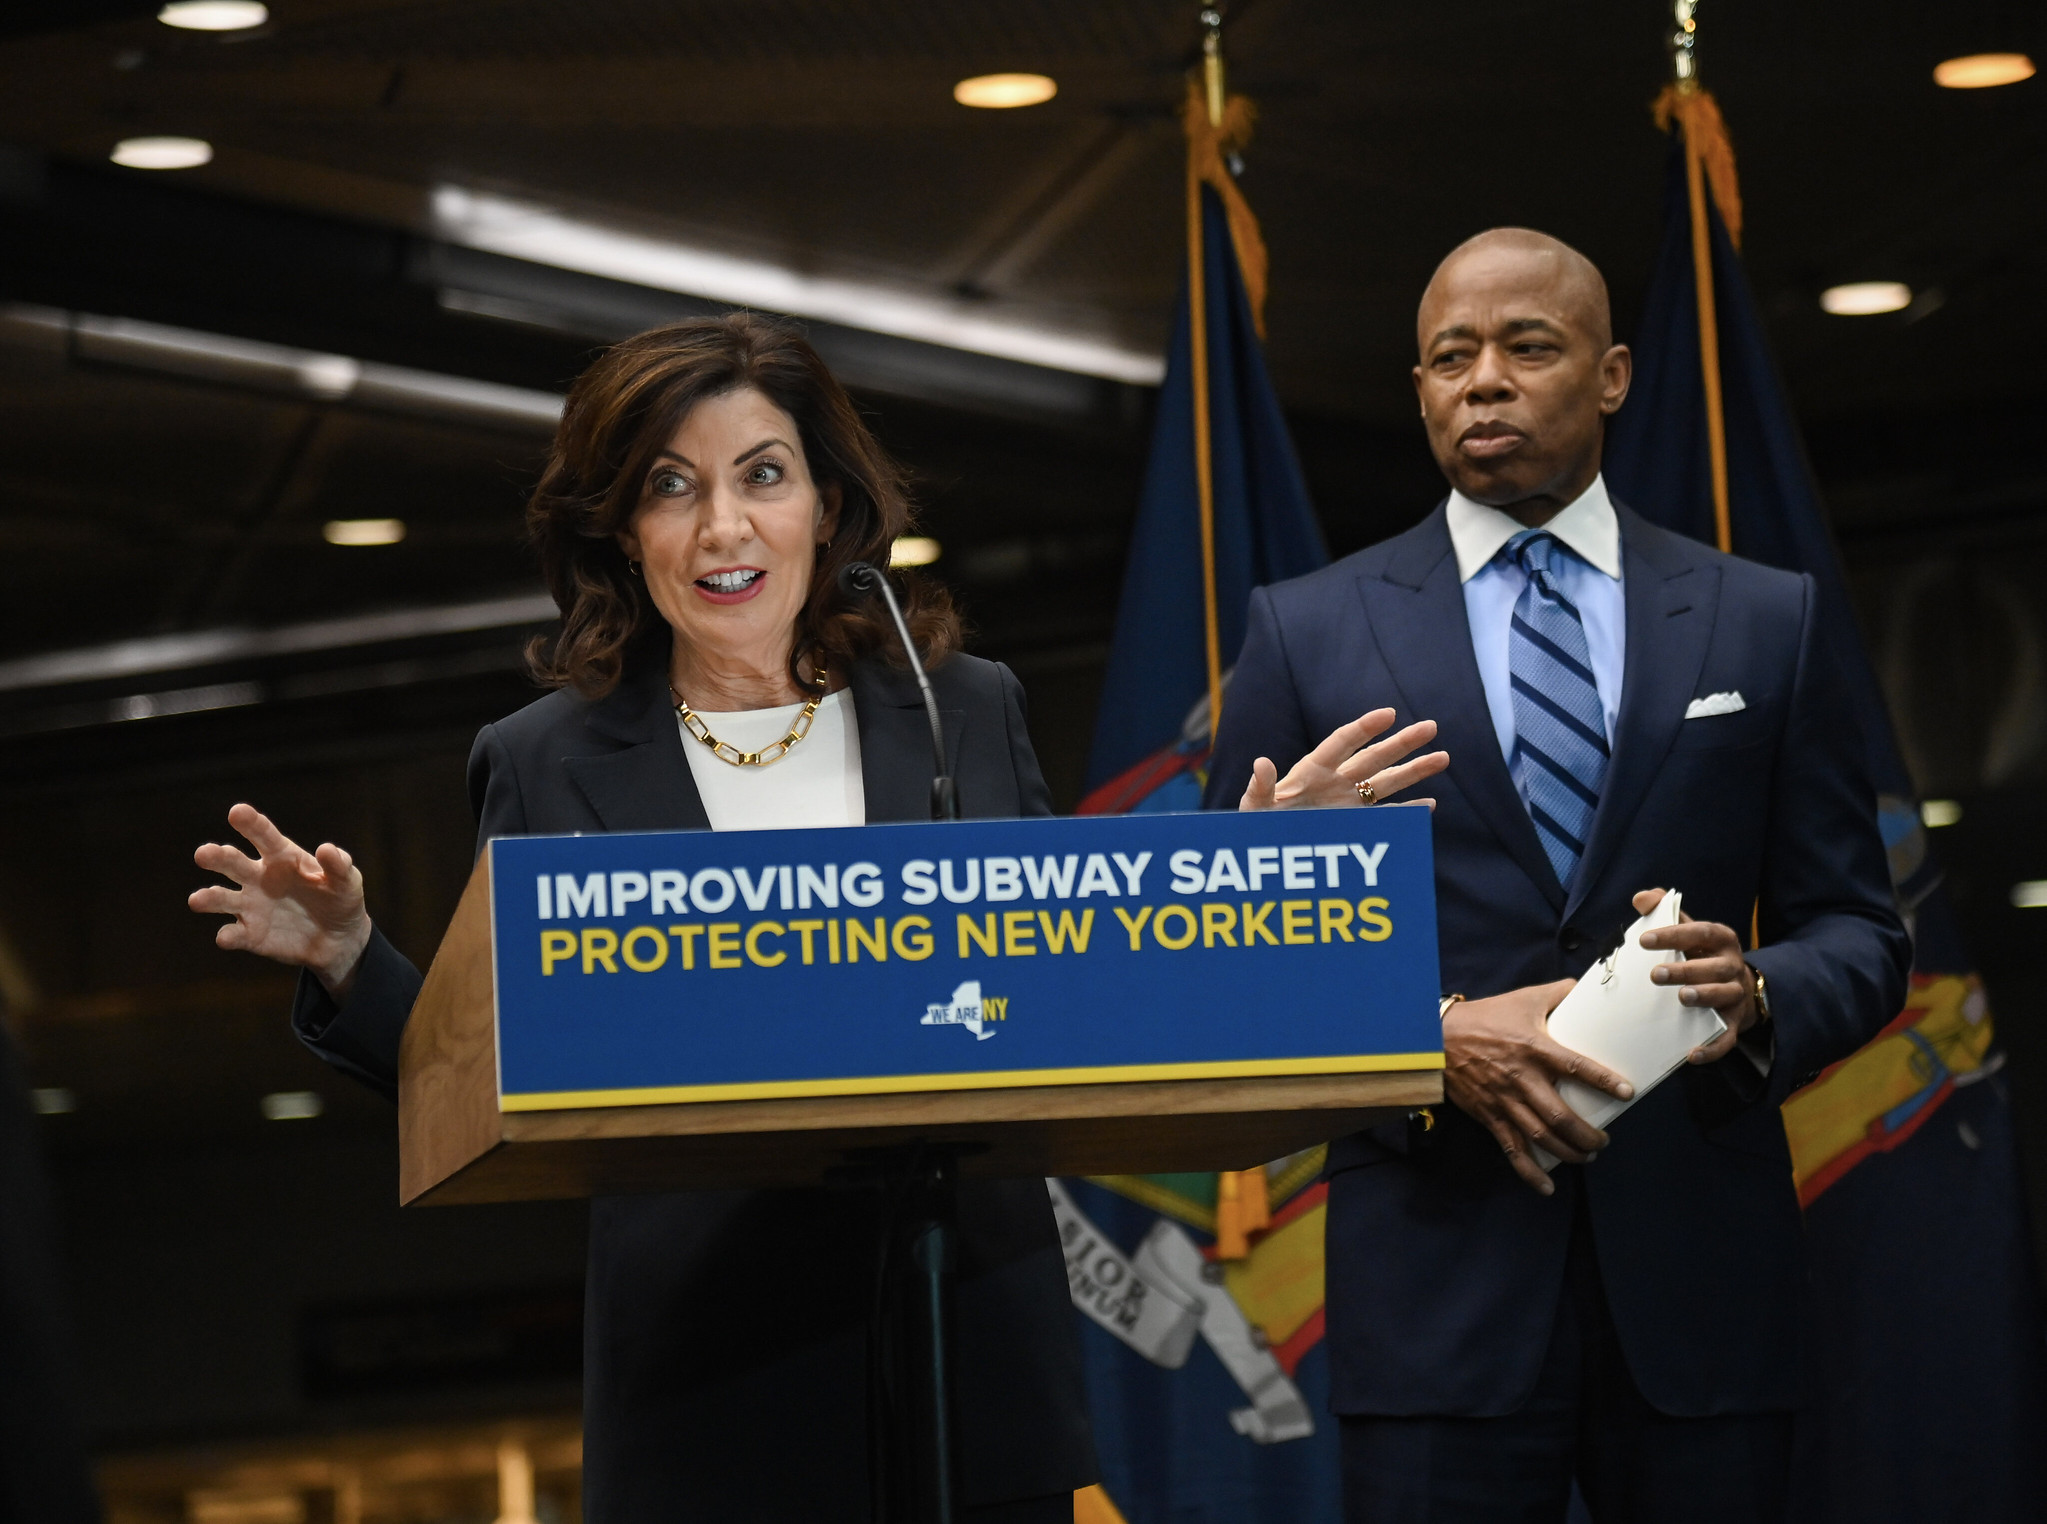 NY Gov. Hochul and teachers union at odds